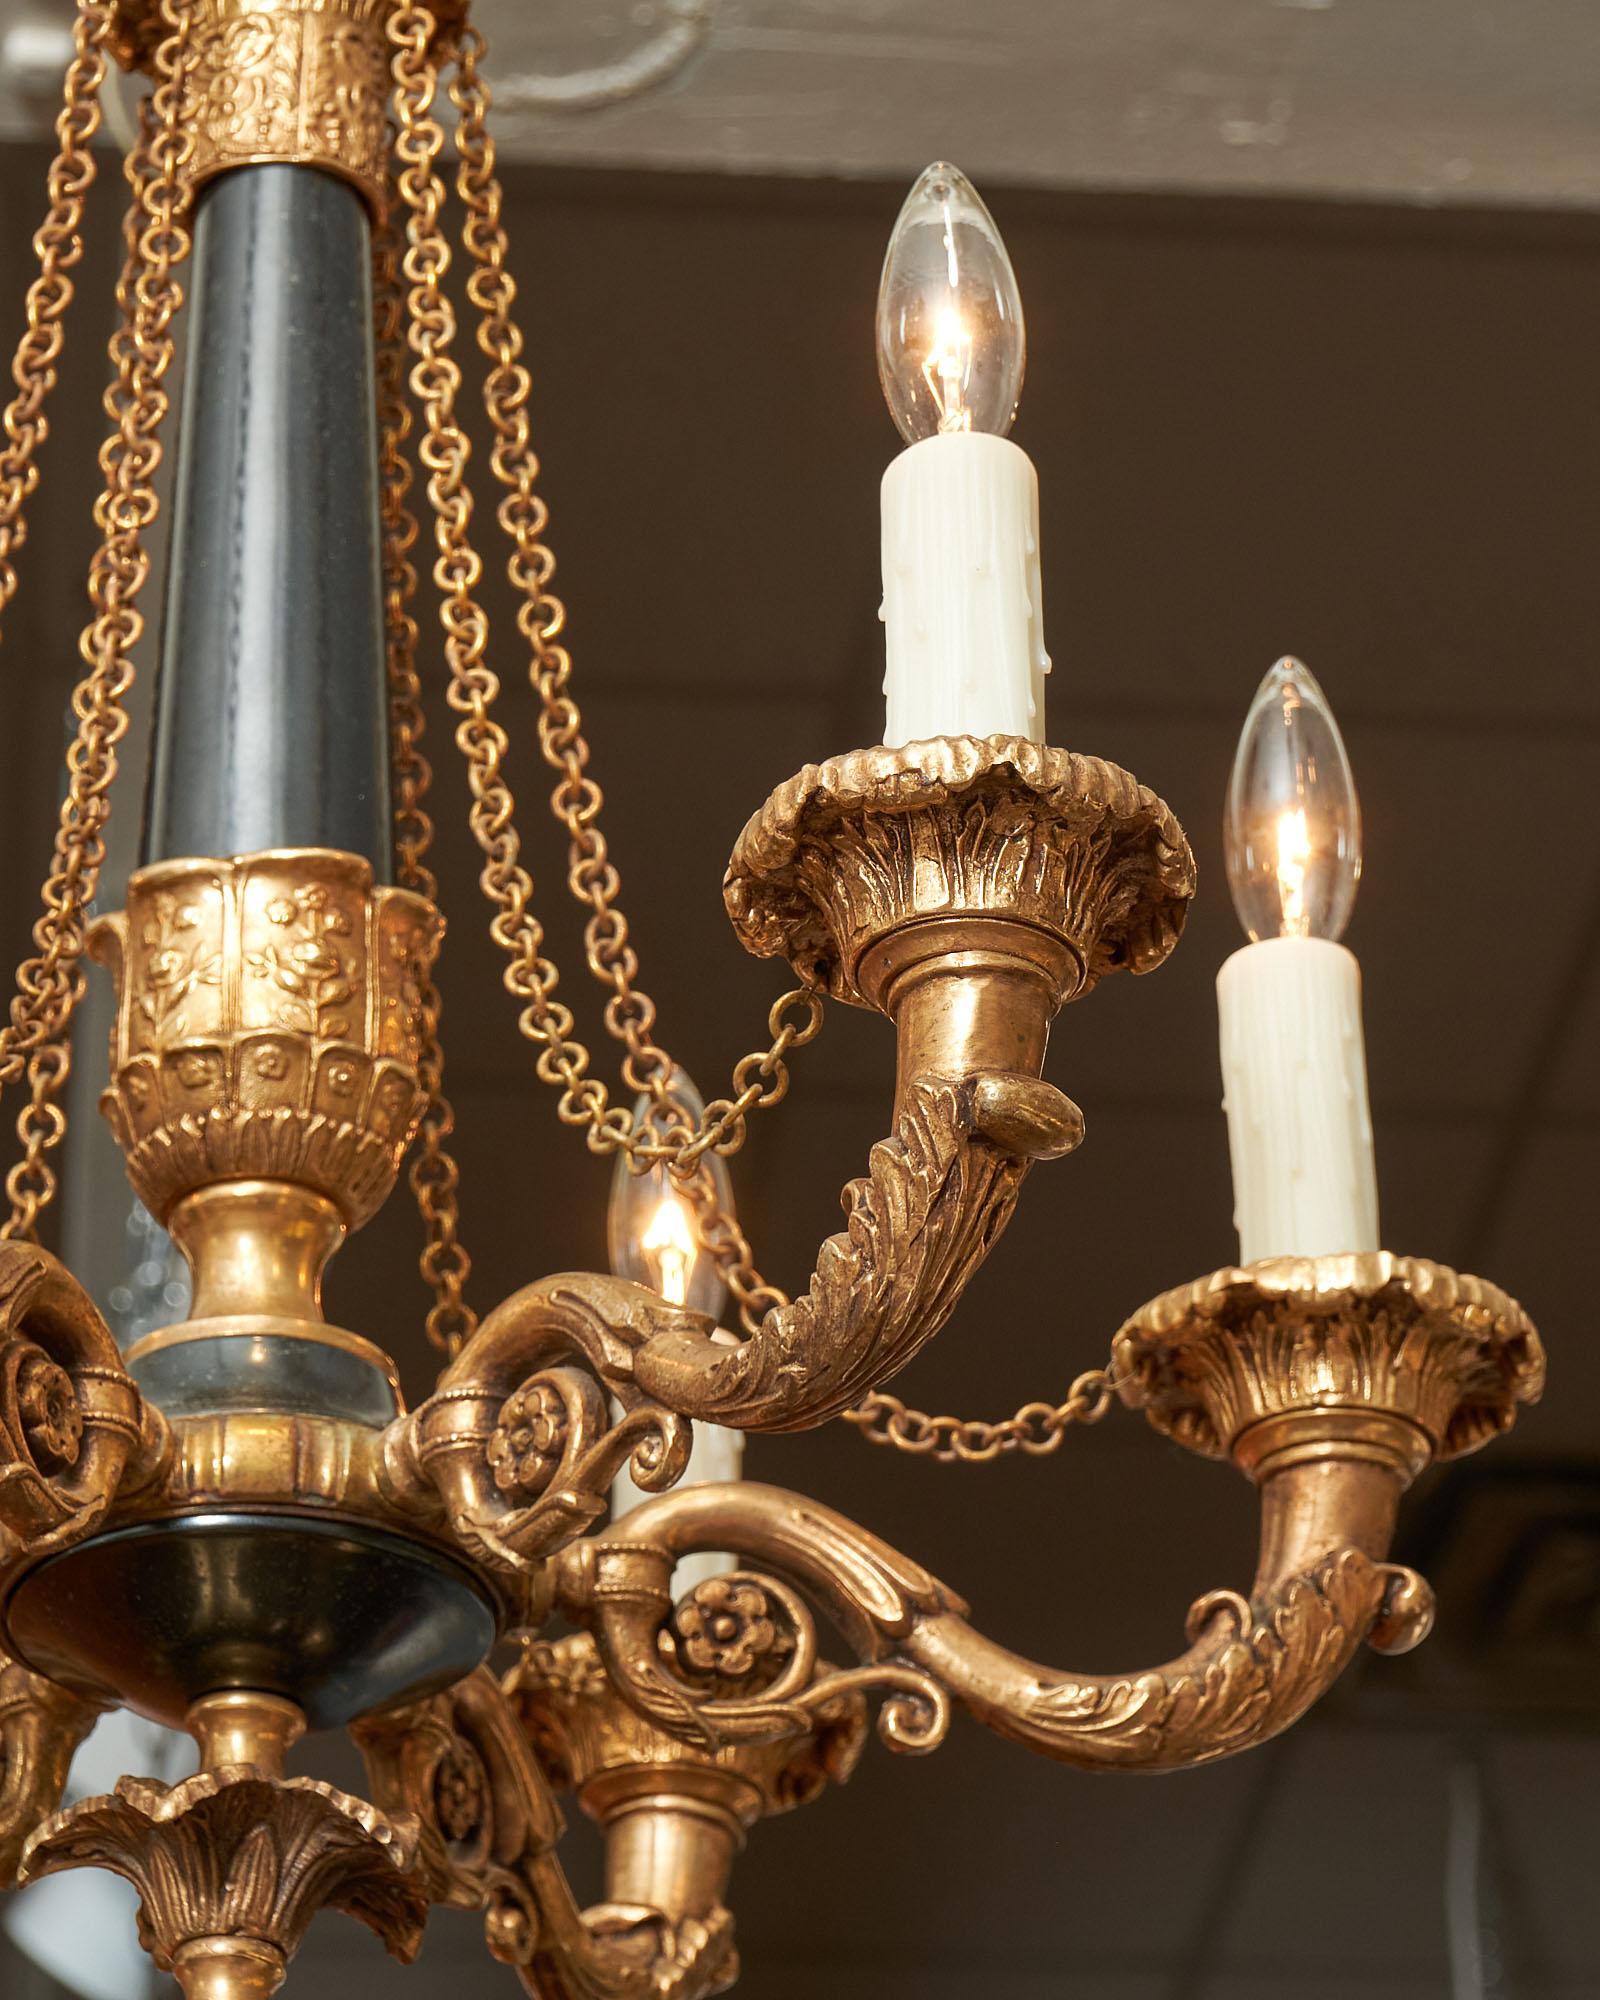 Chandelier in the French Empire style featuring finely cast bronze elements and six branches with chains. It has been newly wired to fit US standards.